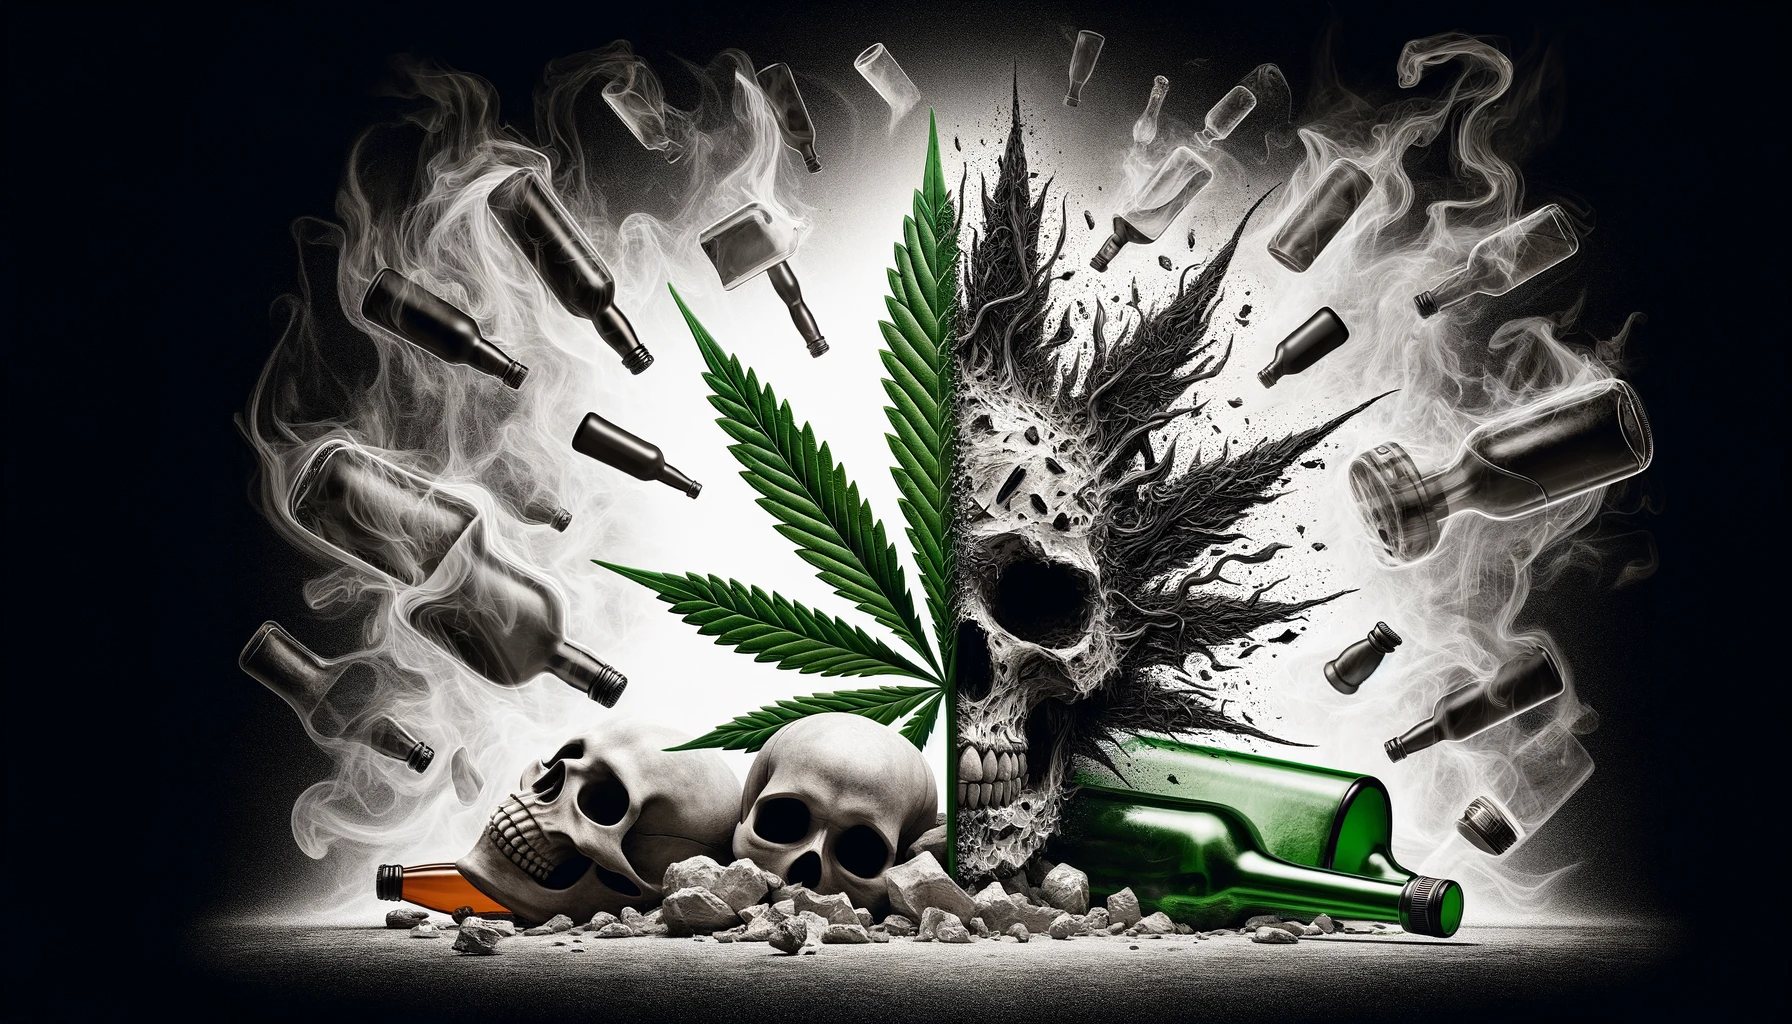 A stark visual comparison between a serene cannabis leaf and chaotic, destructive symbols of alcohol, like broken bottles and skulls.